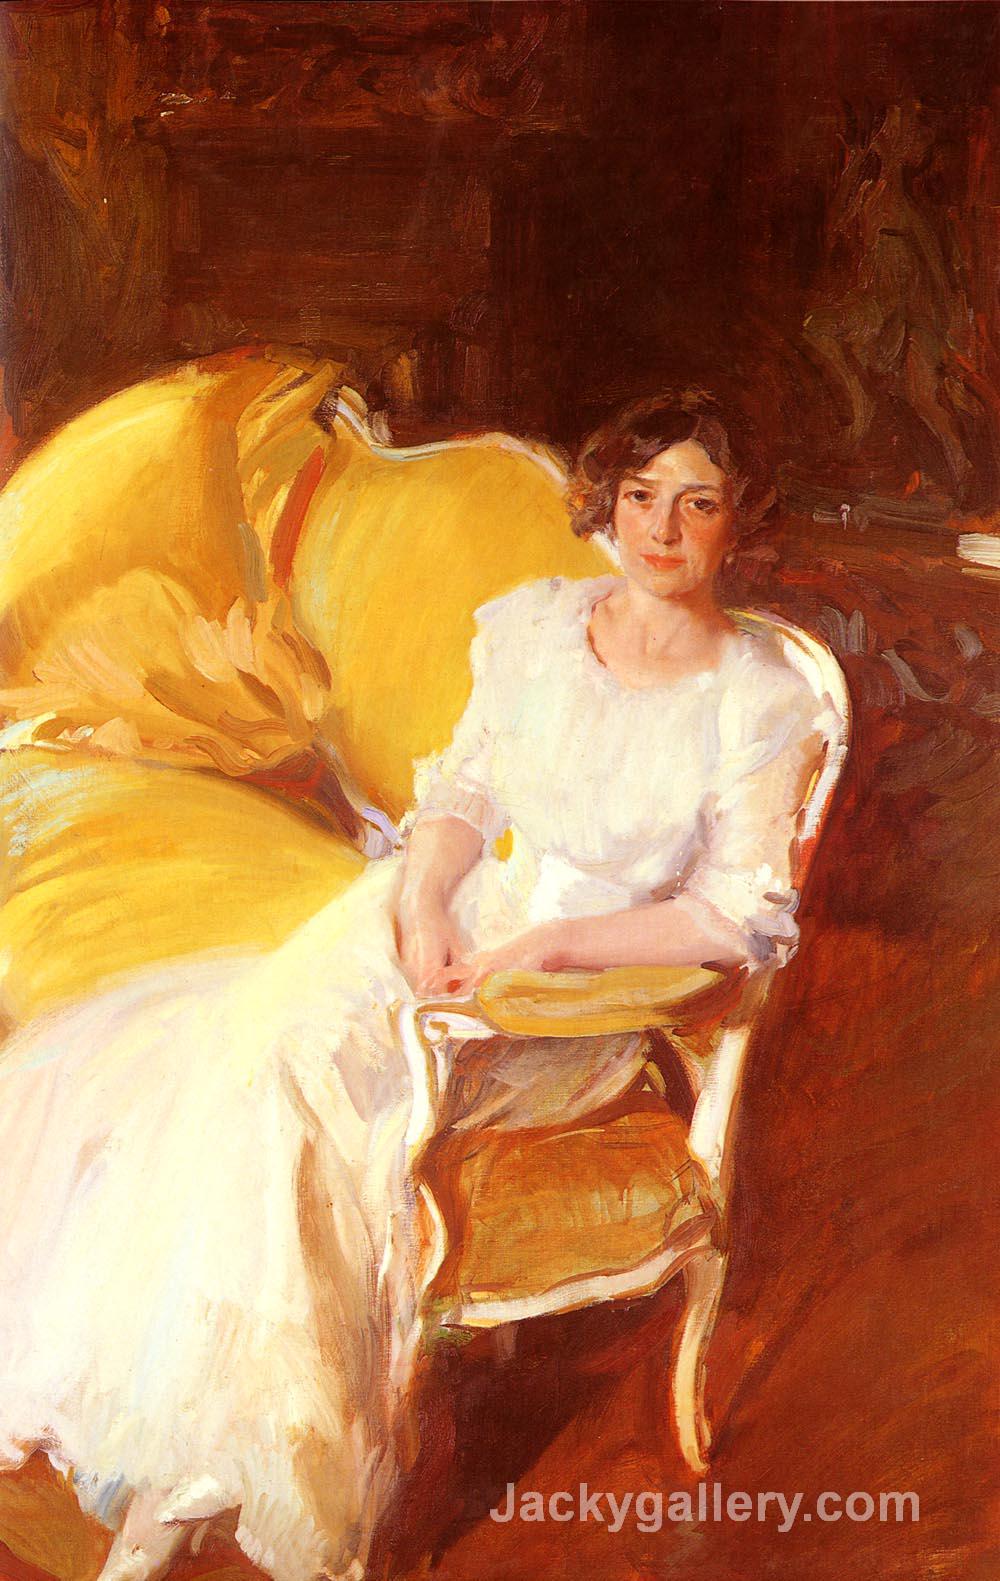 Clotidle sitting on the sofa by Joaquin Sorolla y Bastida paintings reproduction